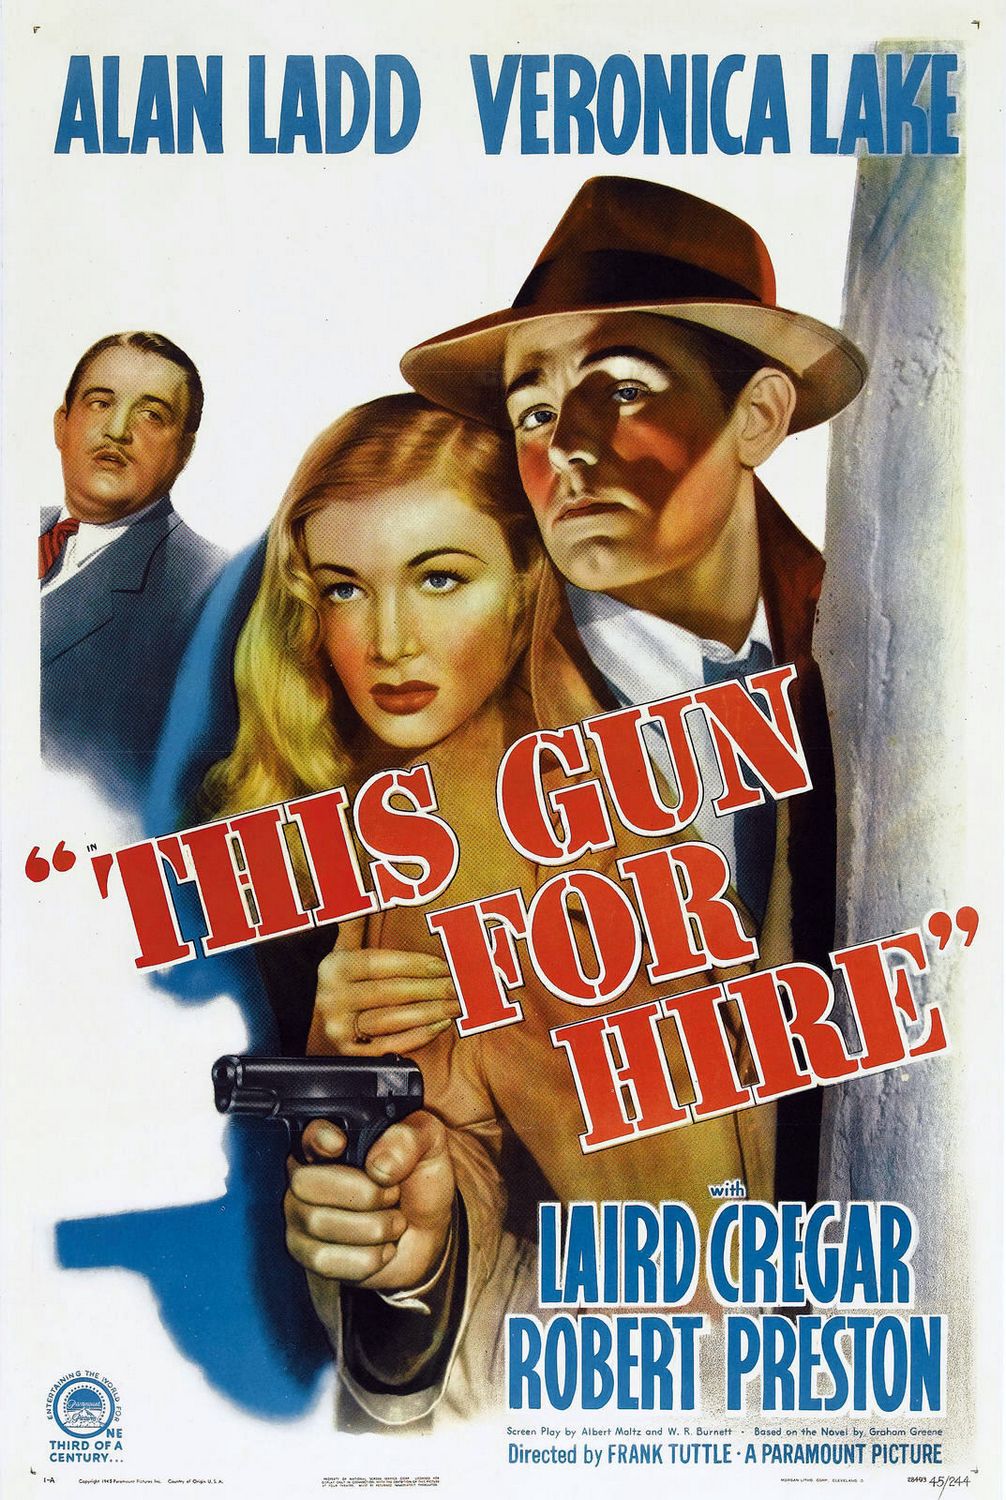 This Gun for Hire movie